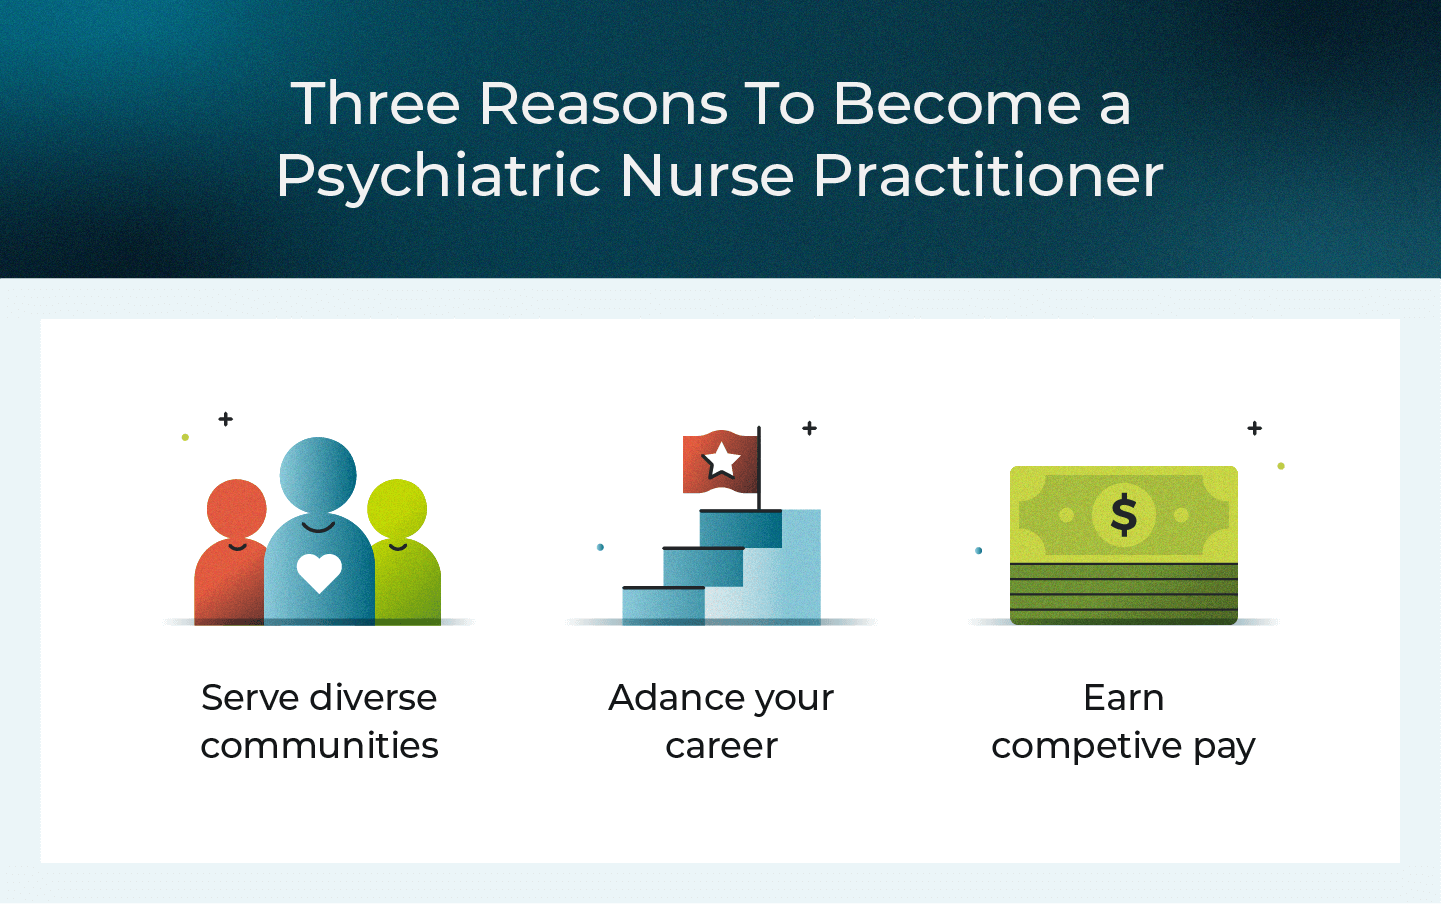 A “How to become a psychiatric-mental health nurse practitioner” infographic shares three reasons to pursue the role. 